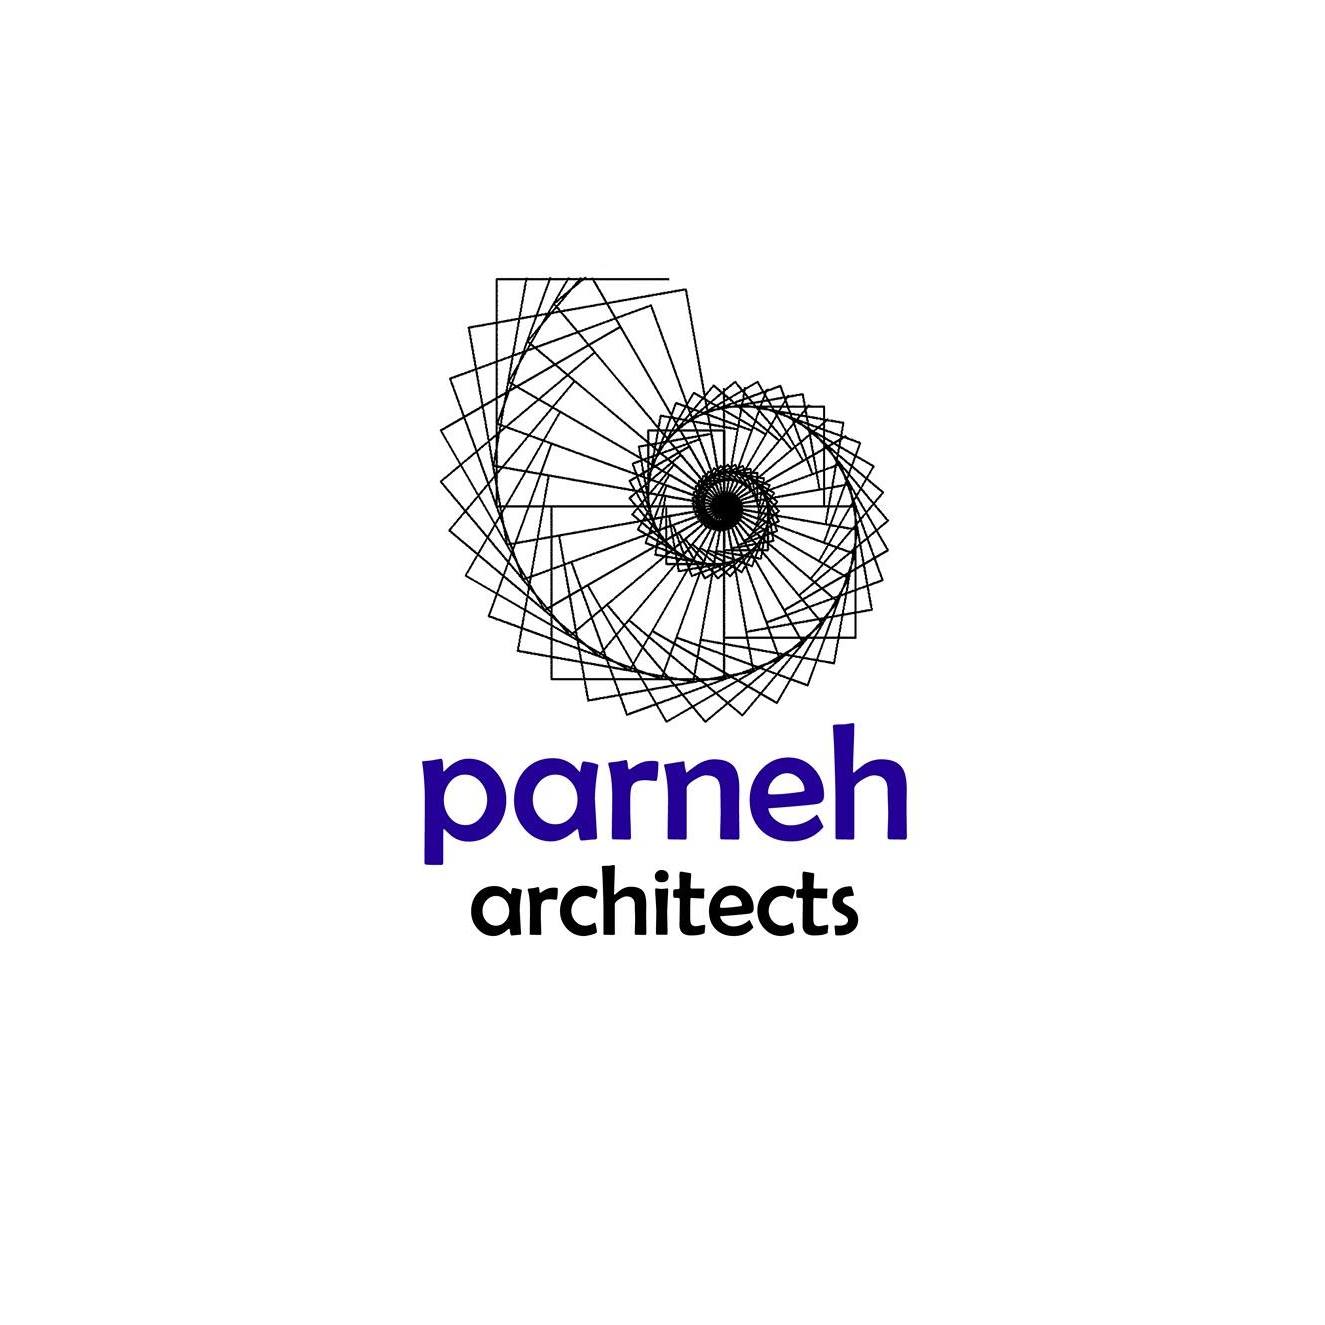 Parneh Architects|Accounting Services|Professional Services